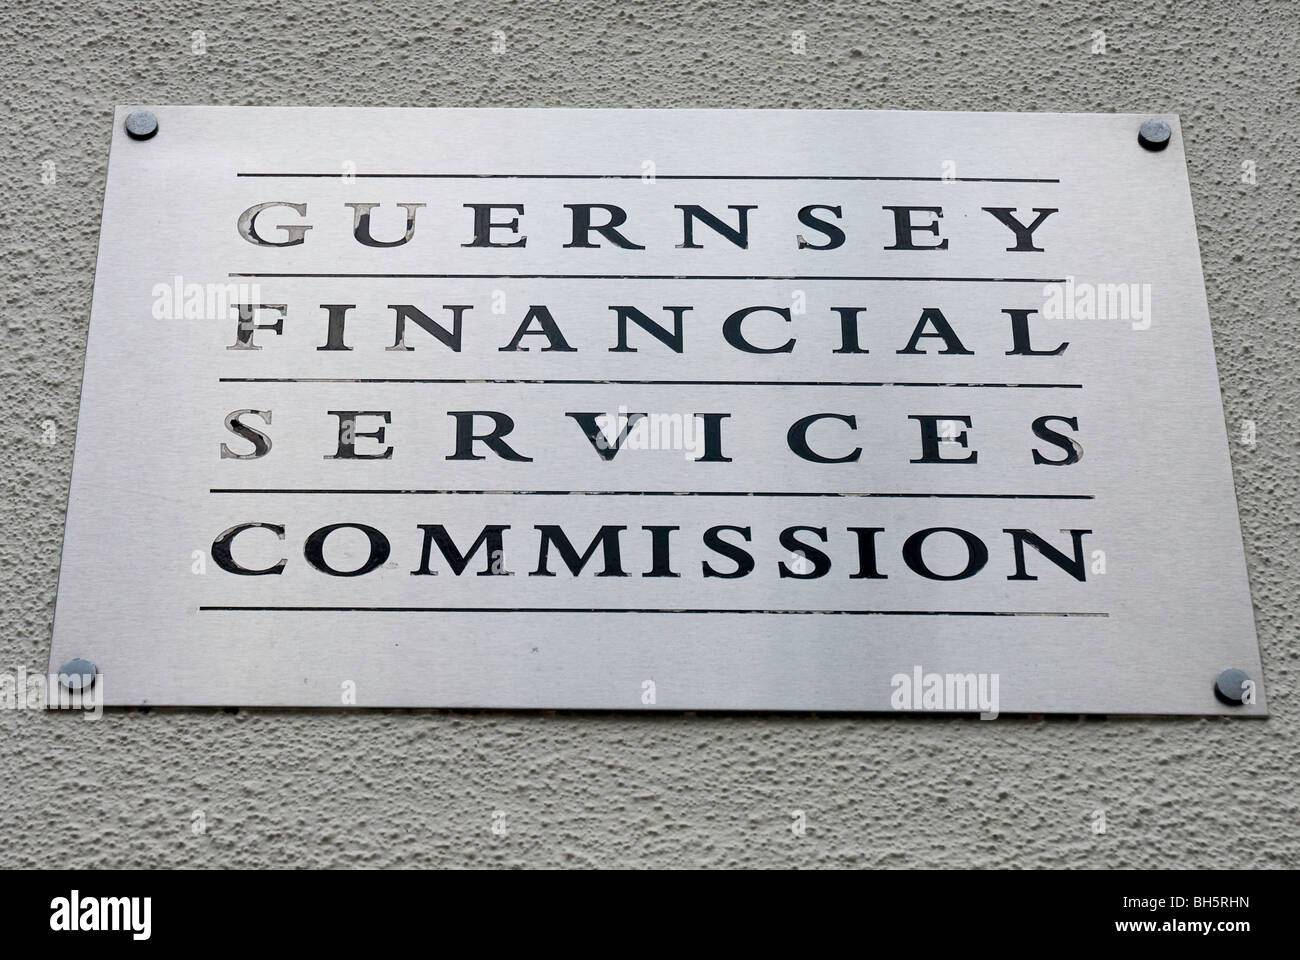 Guernsey Financial Services Commission sign Stock Photo